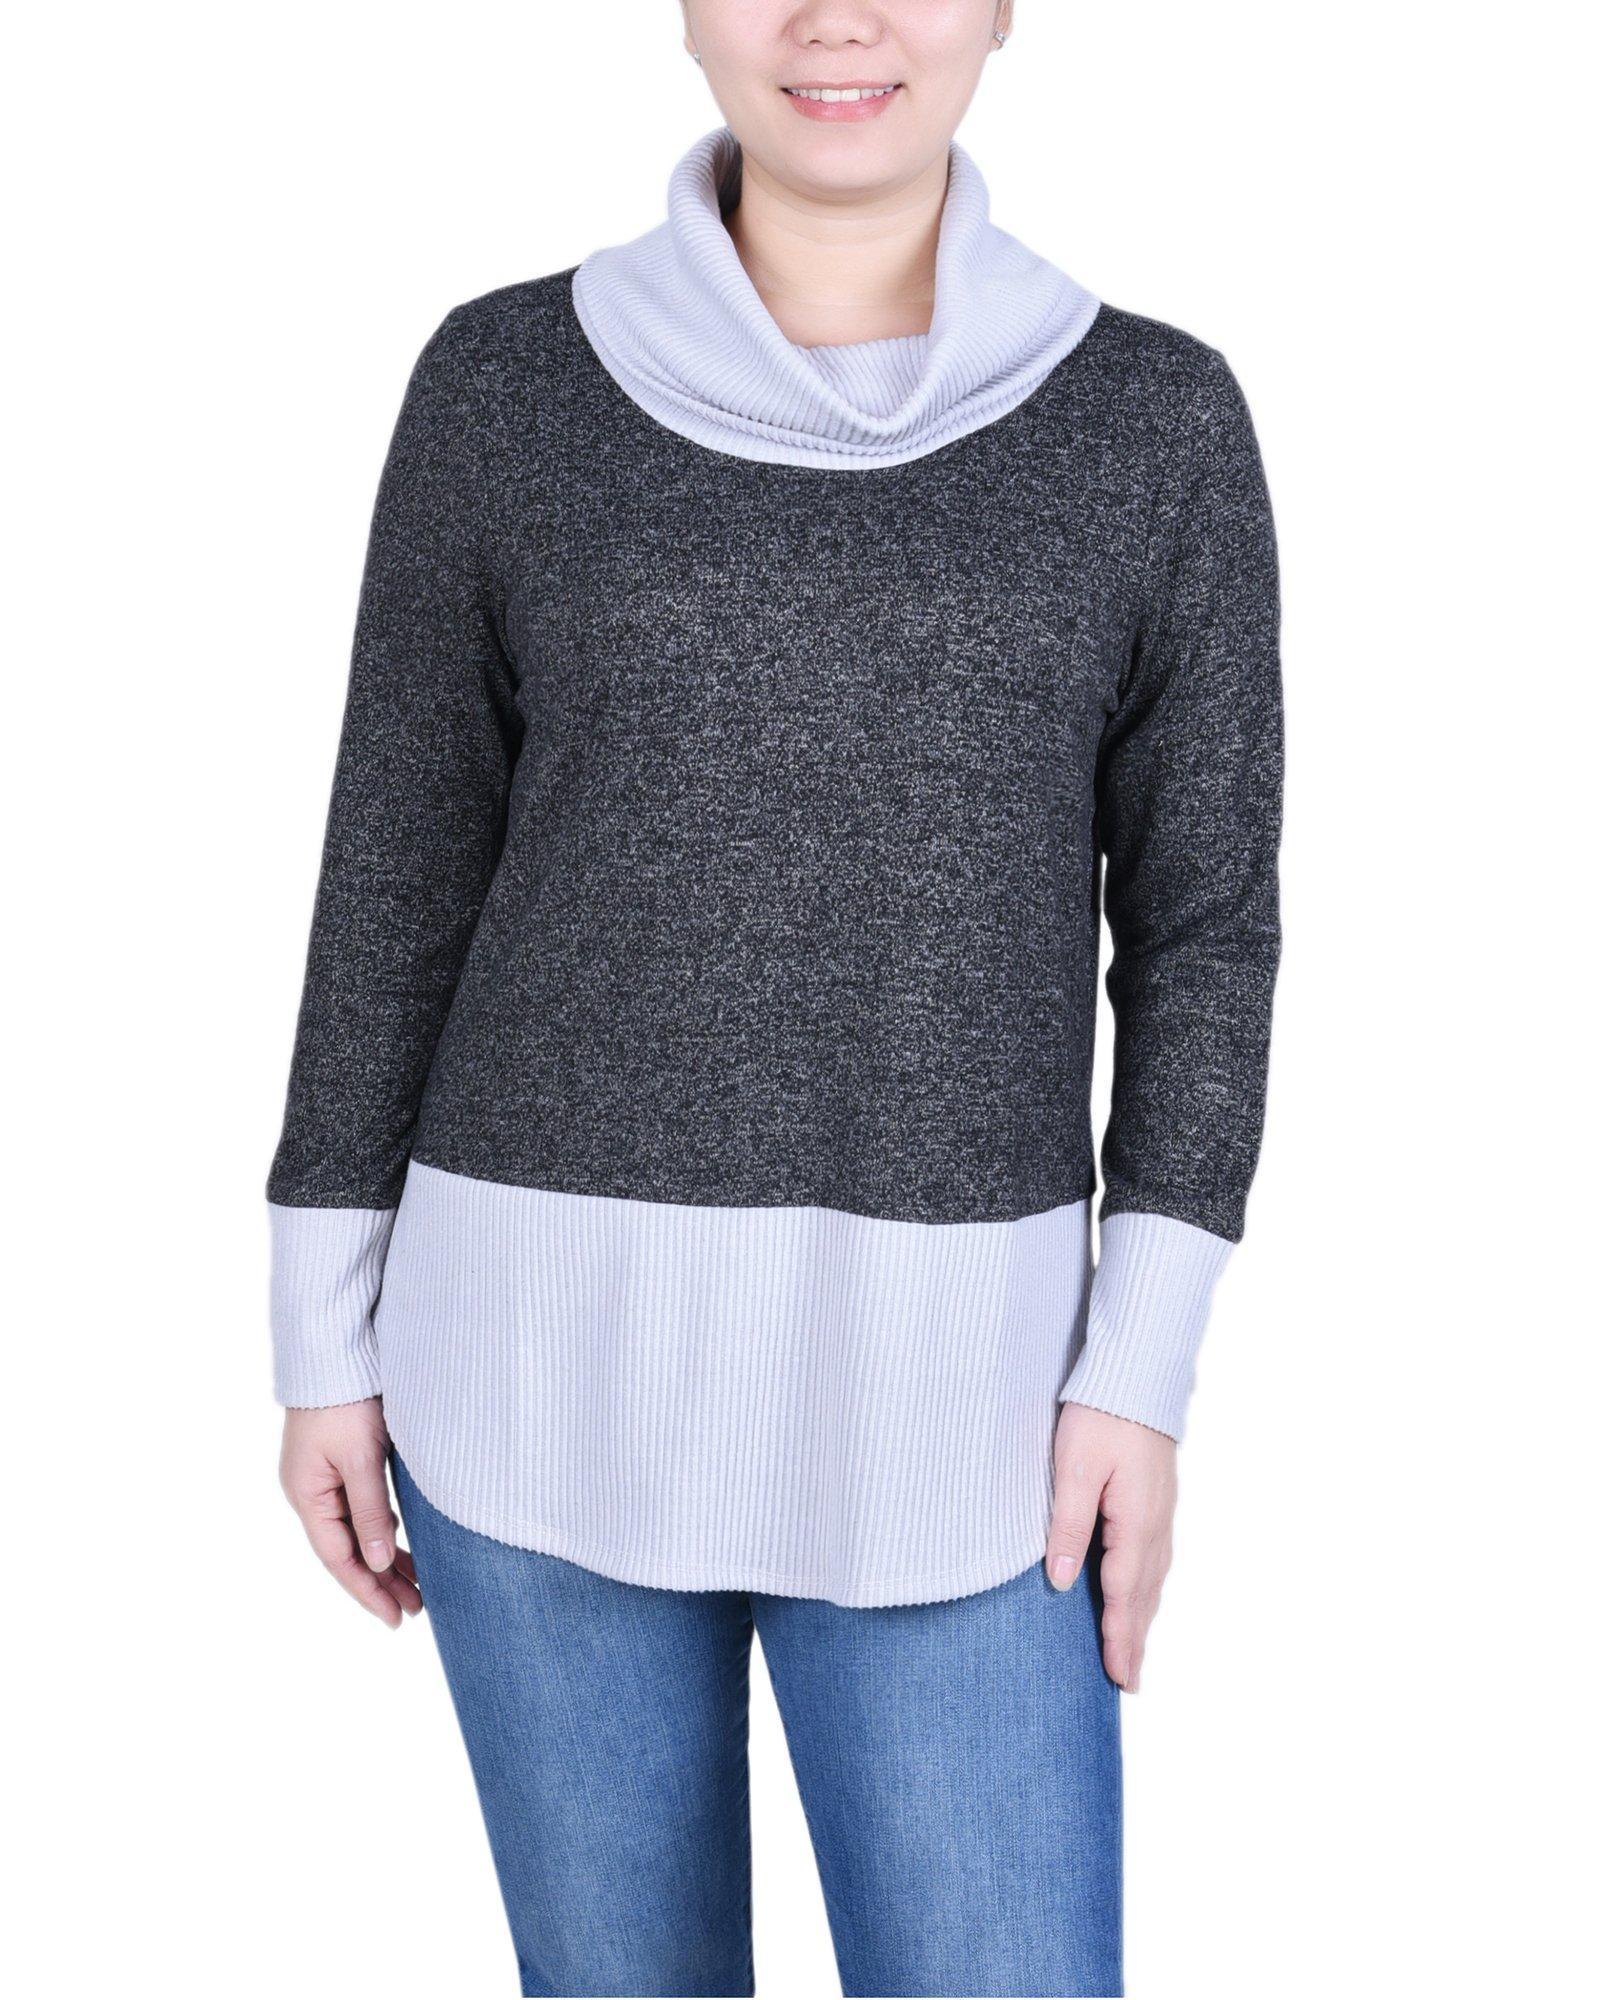 NY Collection Womens Long Sleeve Cowl Neck Colorblocked Top